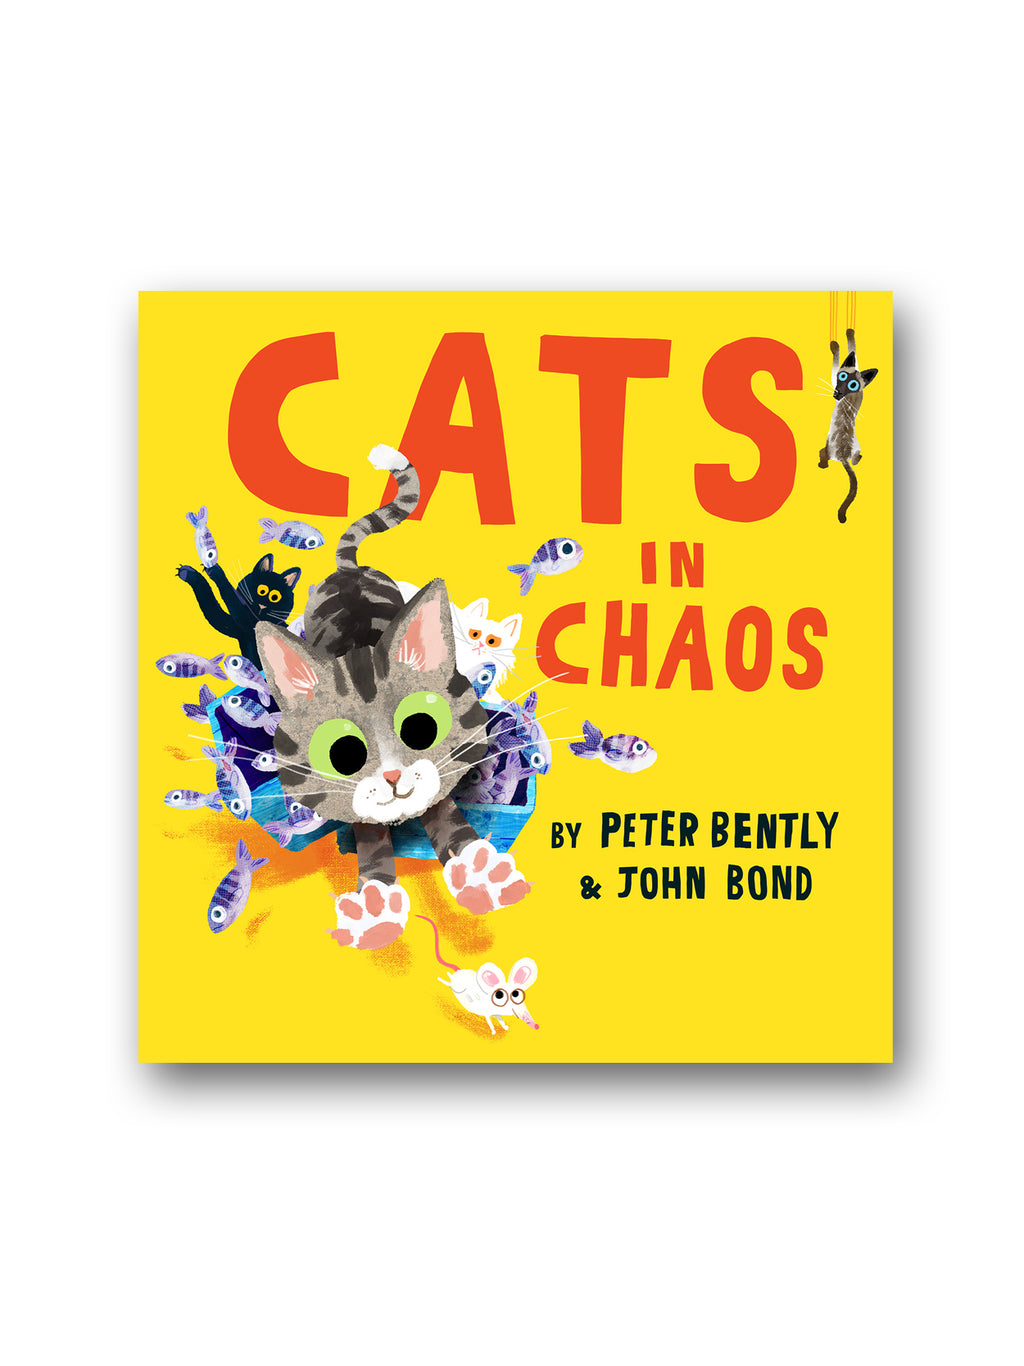 Cats in Chaos